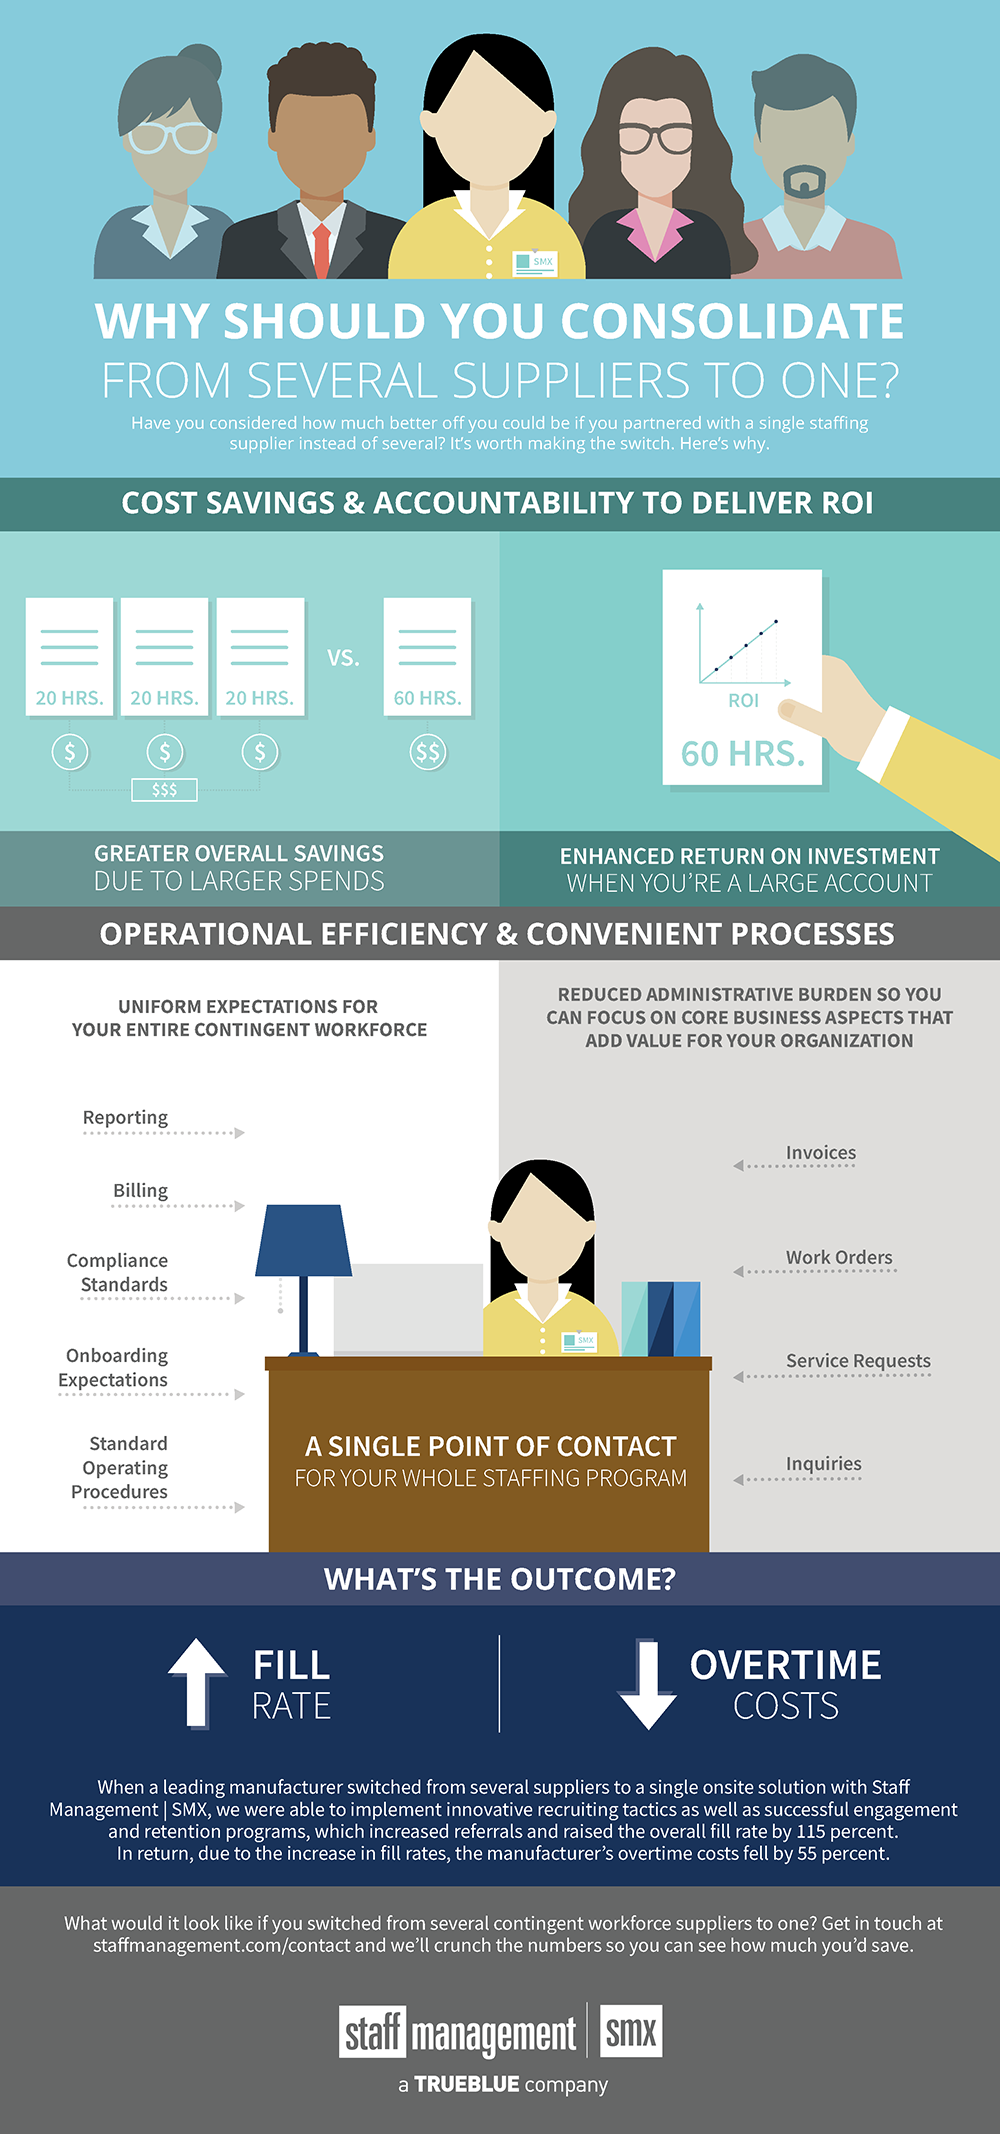 Why-Should-You-Consolidate-From-Several-Suppliers-to-One_Infographic_Staff-Management-SMX_2018